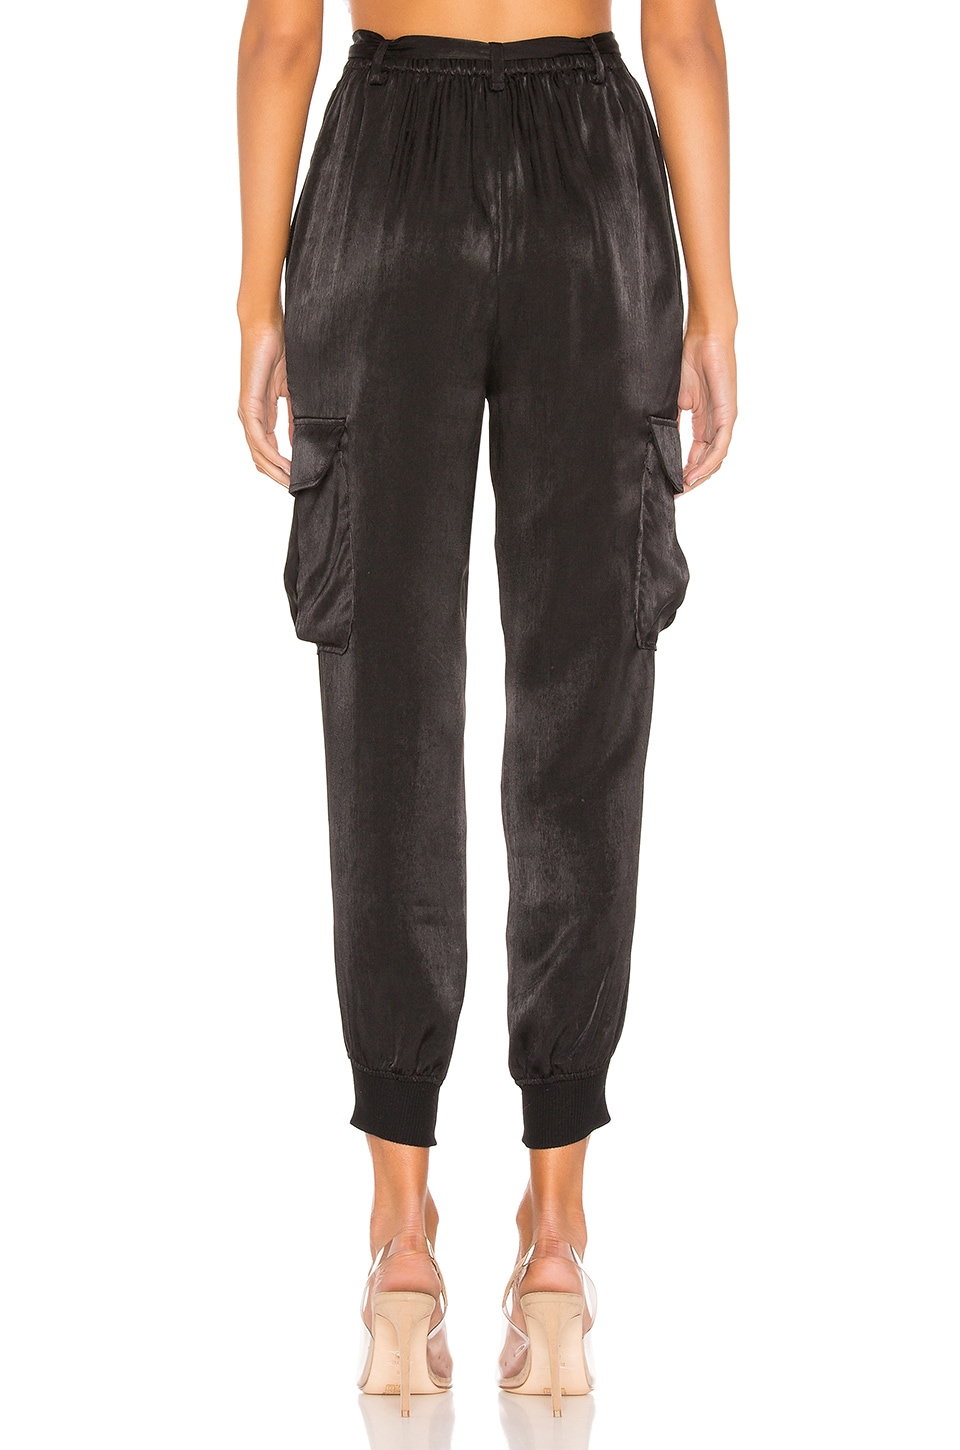 Lovers and Friends Frida Pants Black